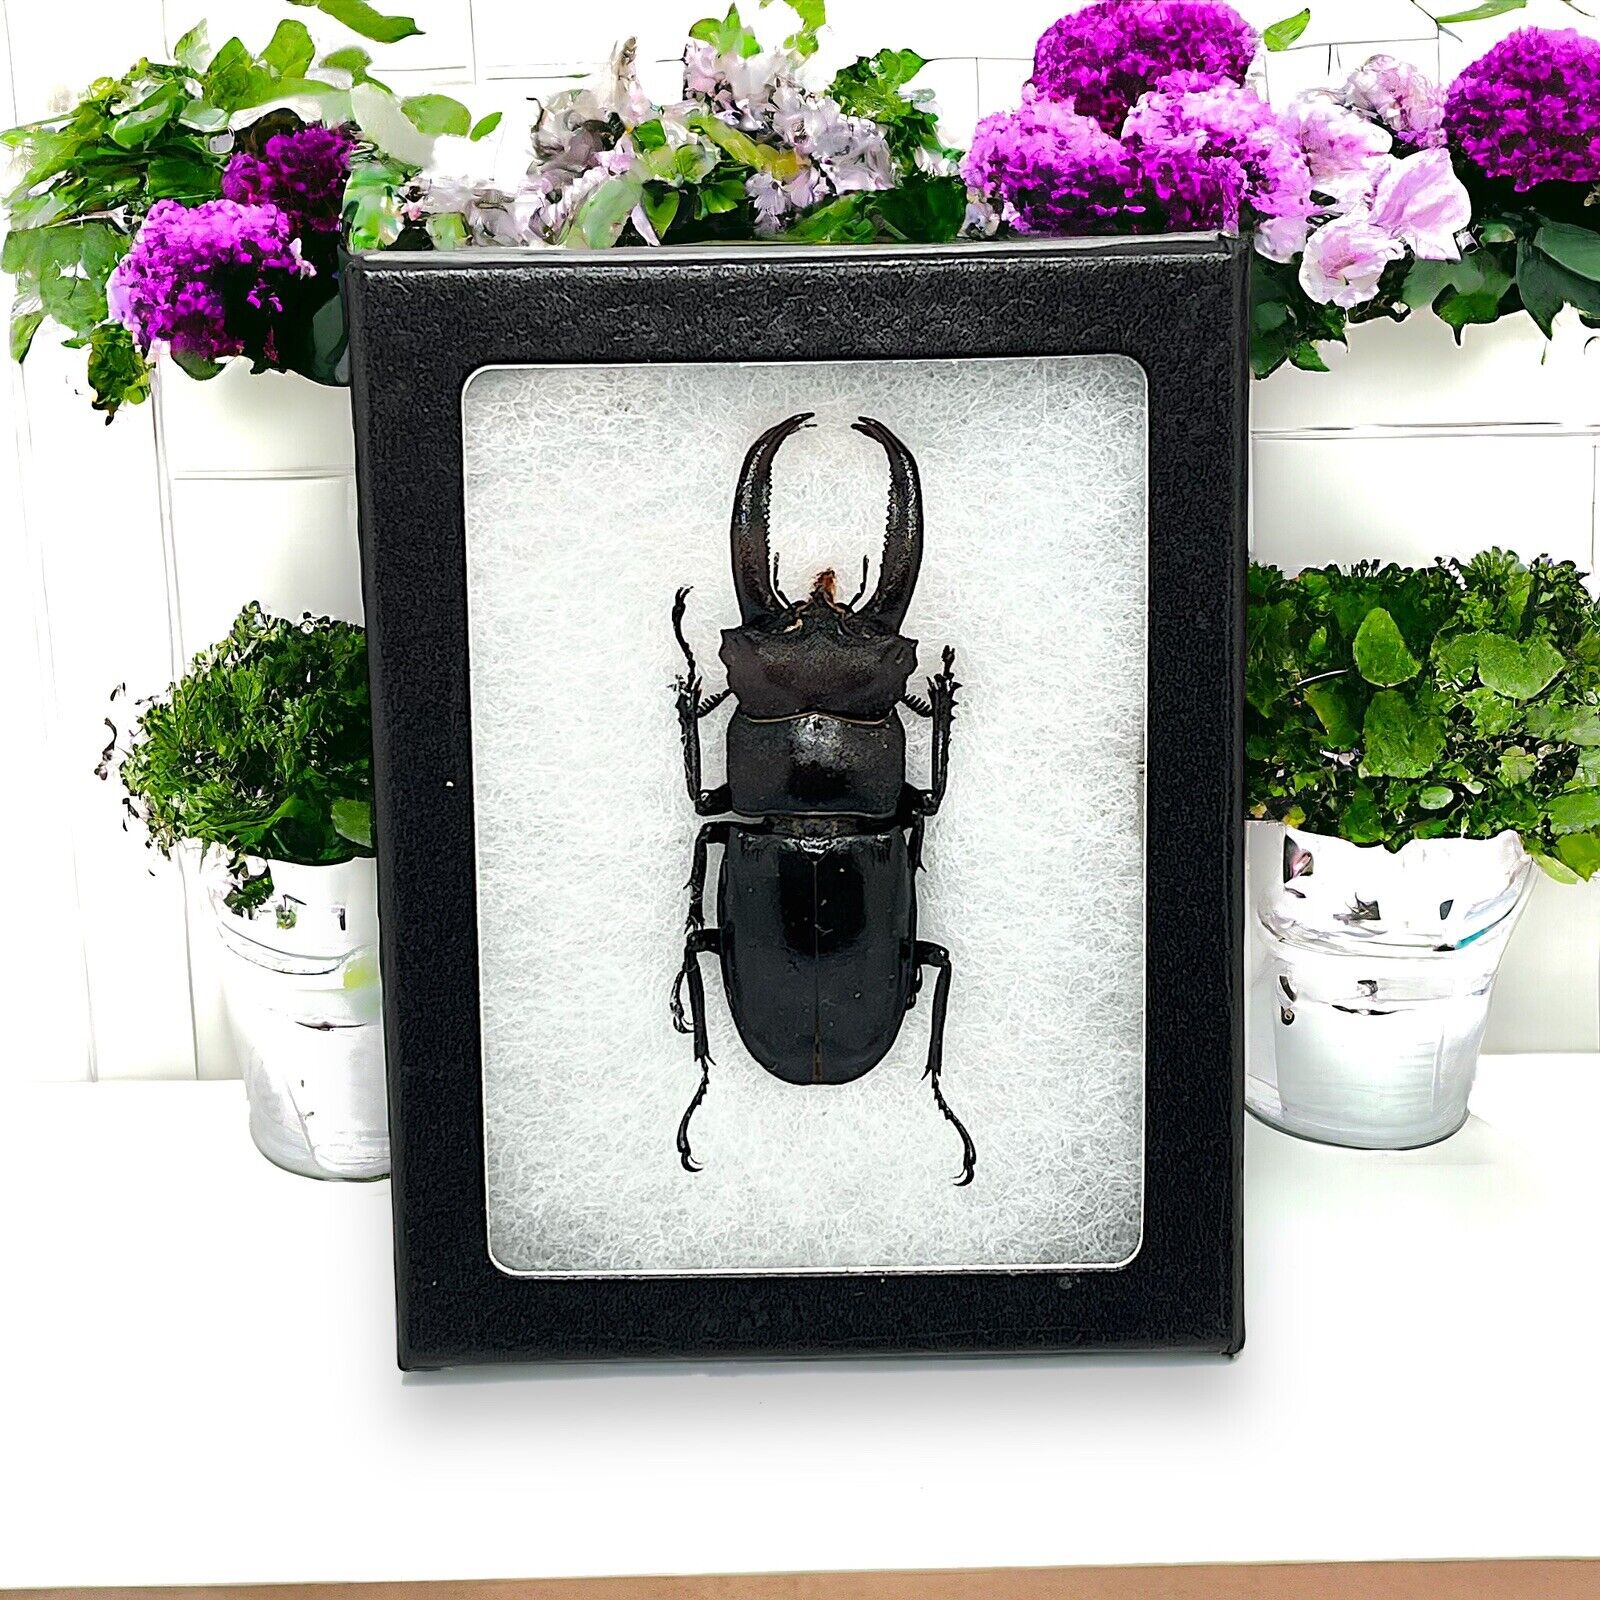 Dorcus Ritsme stag beetle Indonesia framed Glass Shadowbox Insect Bug